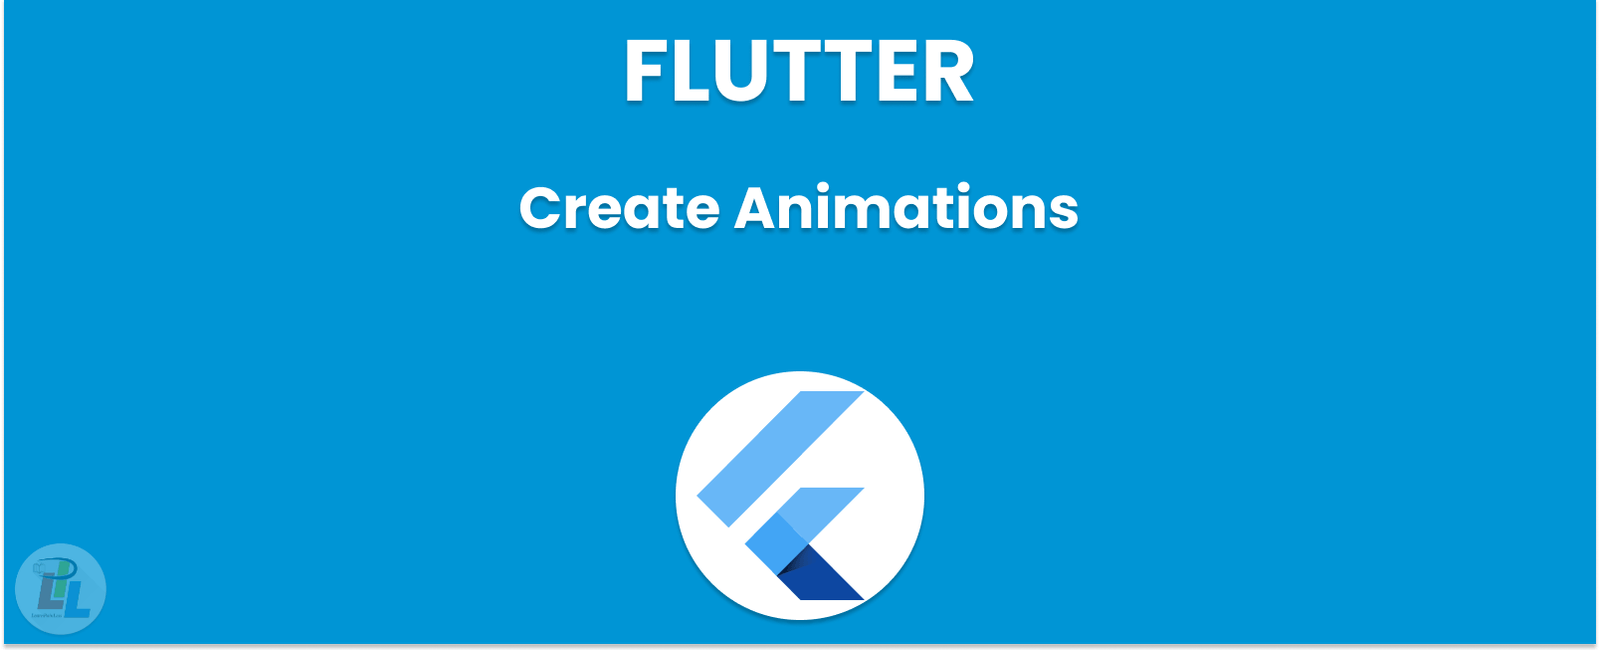 Mastering Animation with Flutter: A Comprehensive Guide on How to Create Animations with Flutter